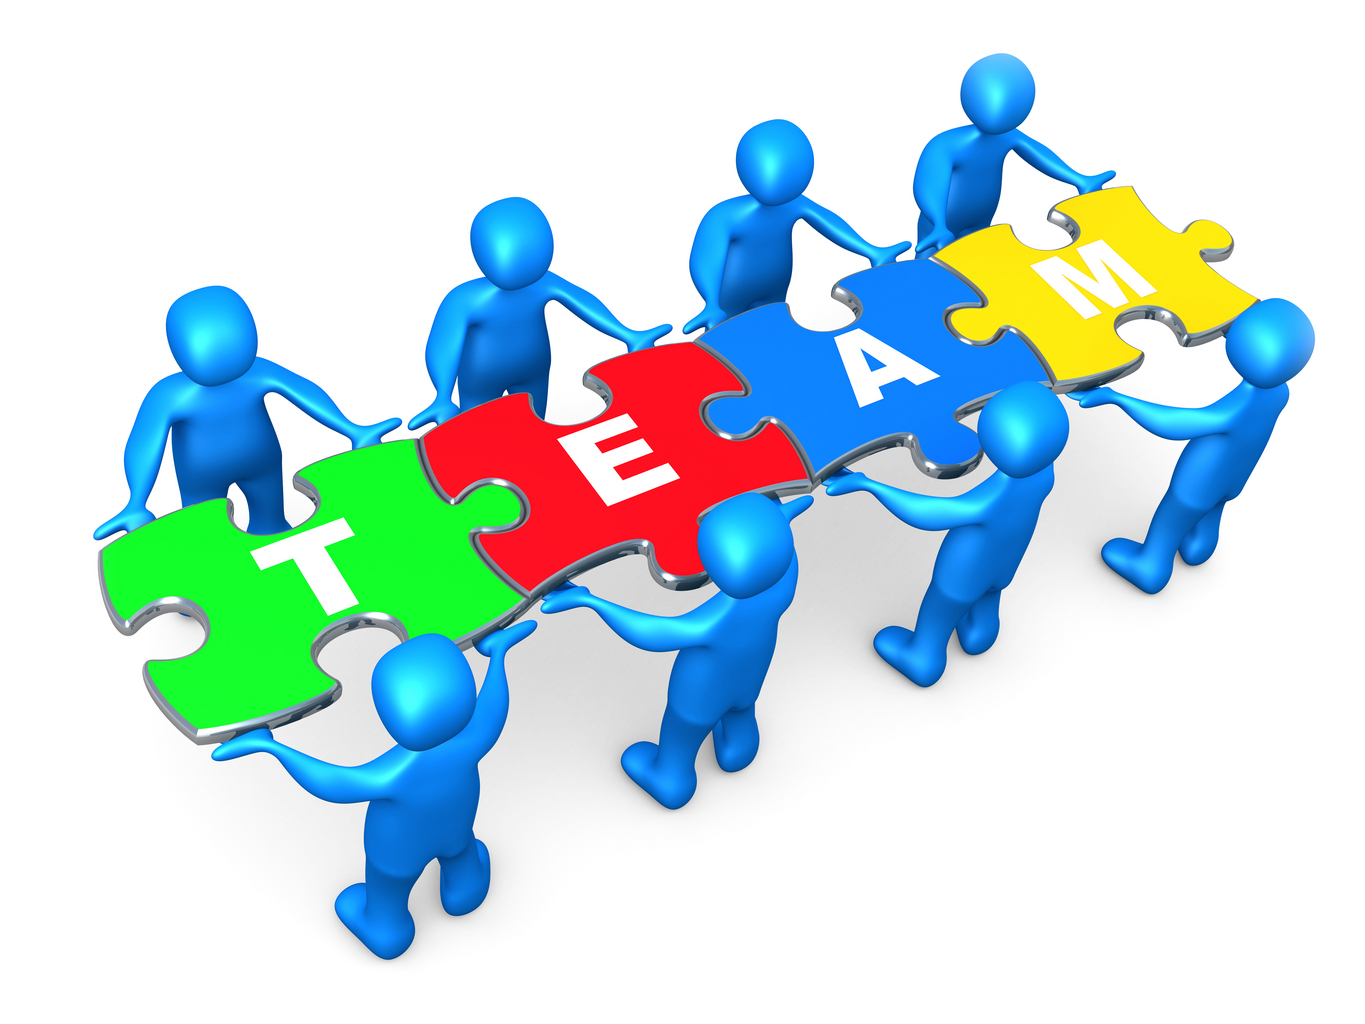 Free image of team. Teamwork clipart participant